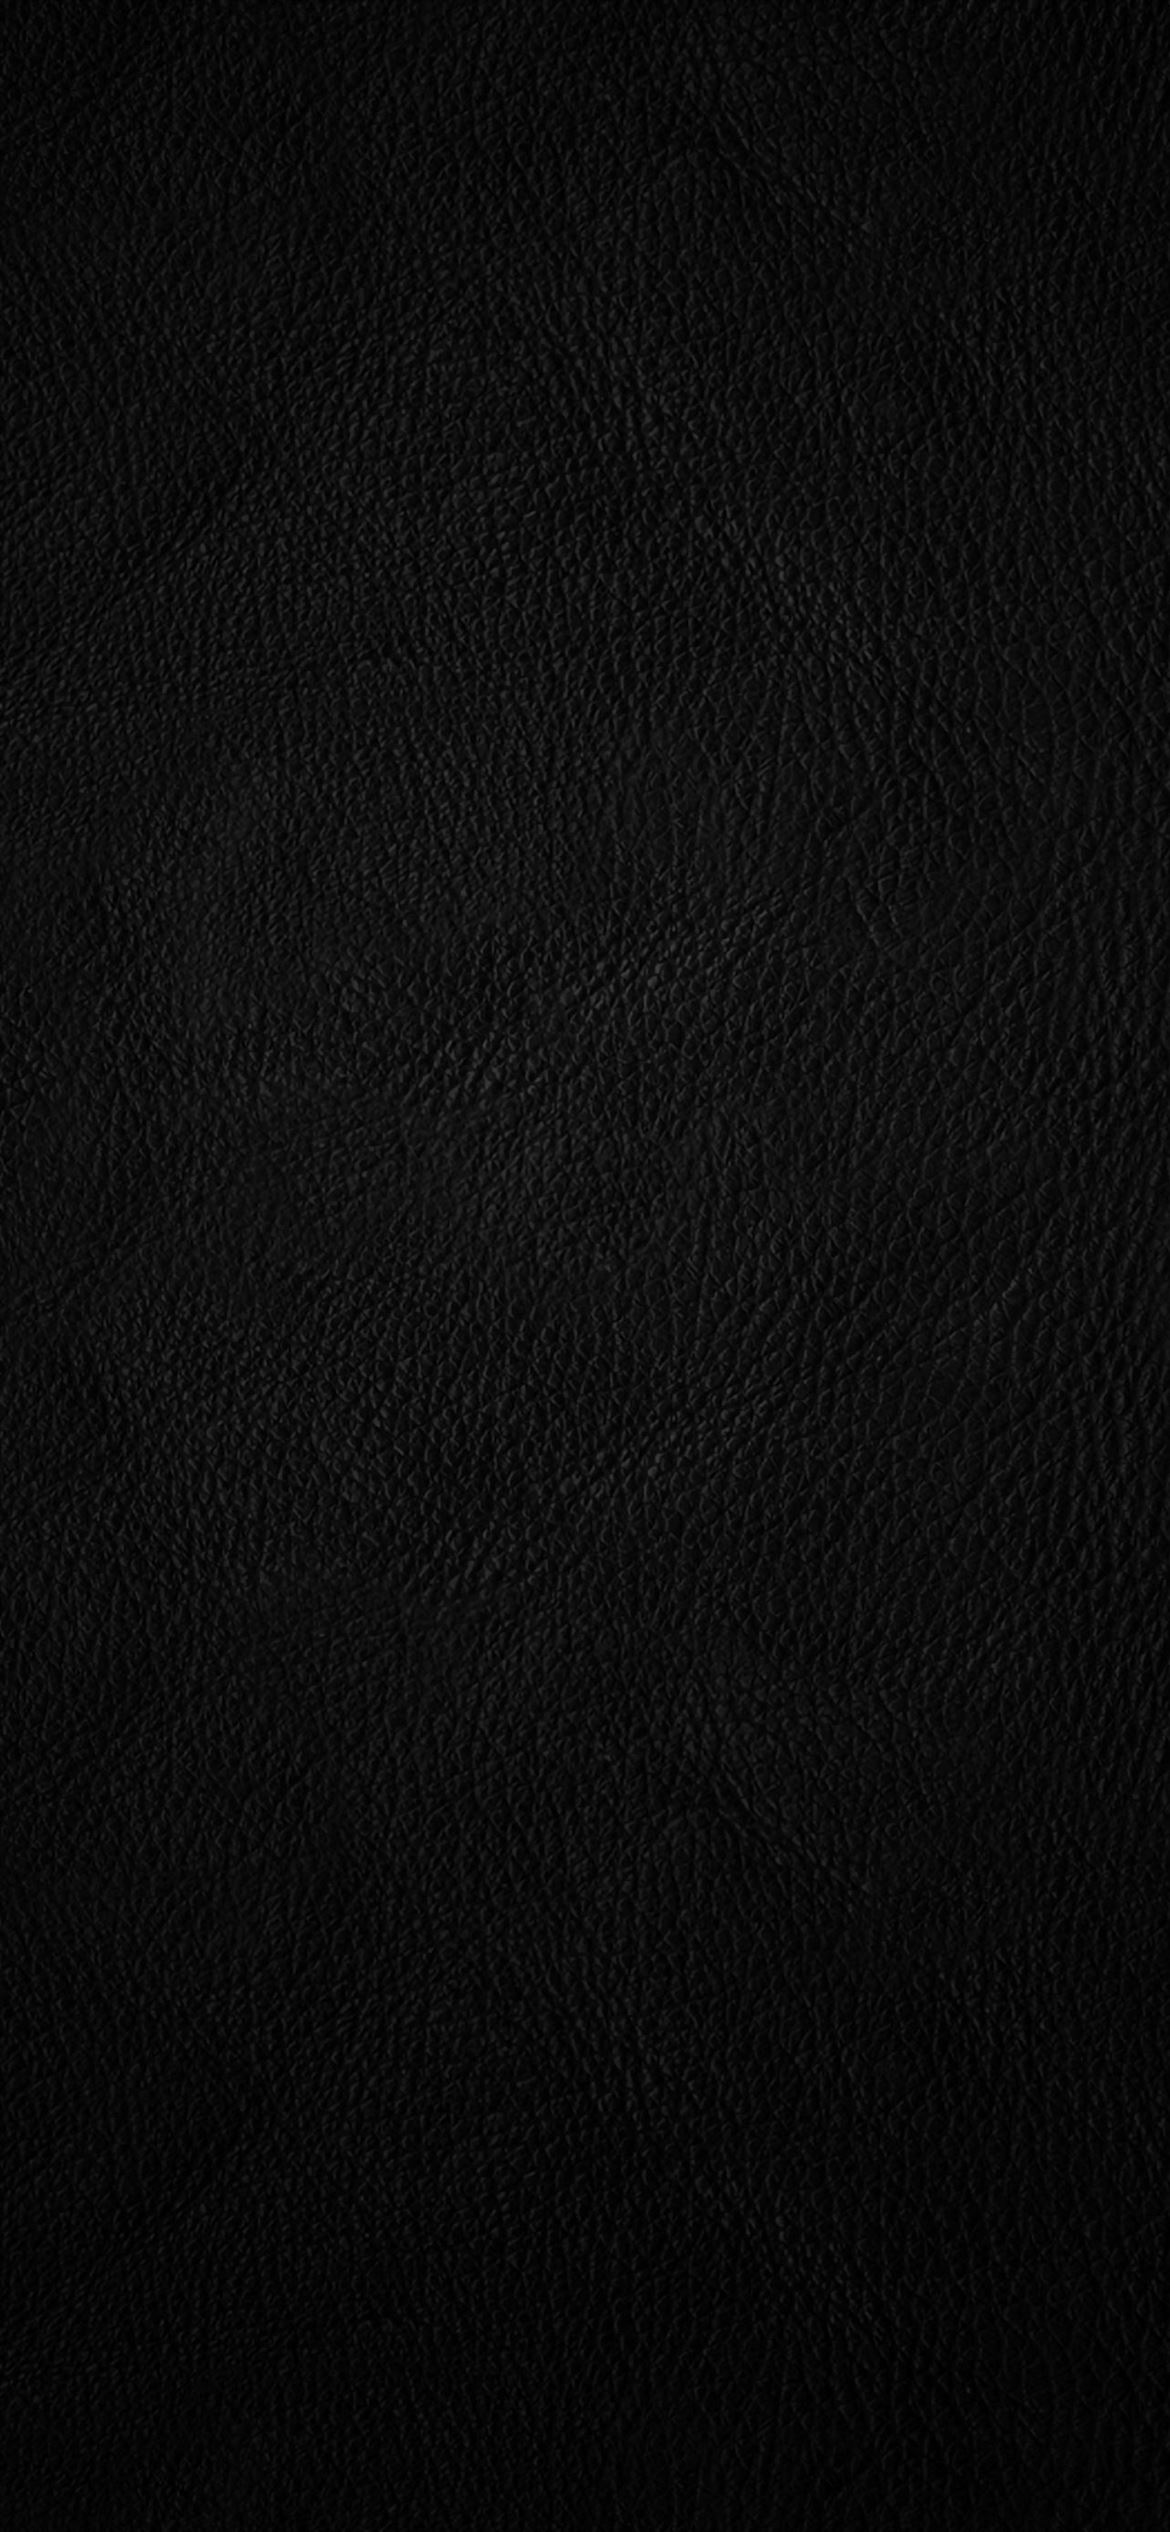 Wallpaper Black and White Abstract Painting Background  Download Free  Image